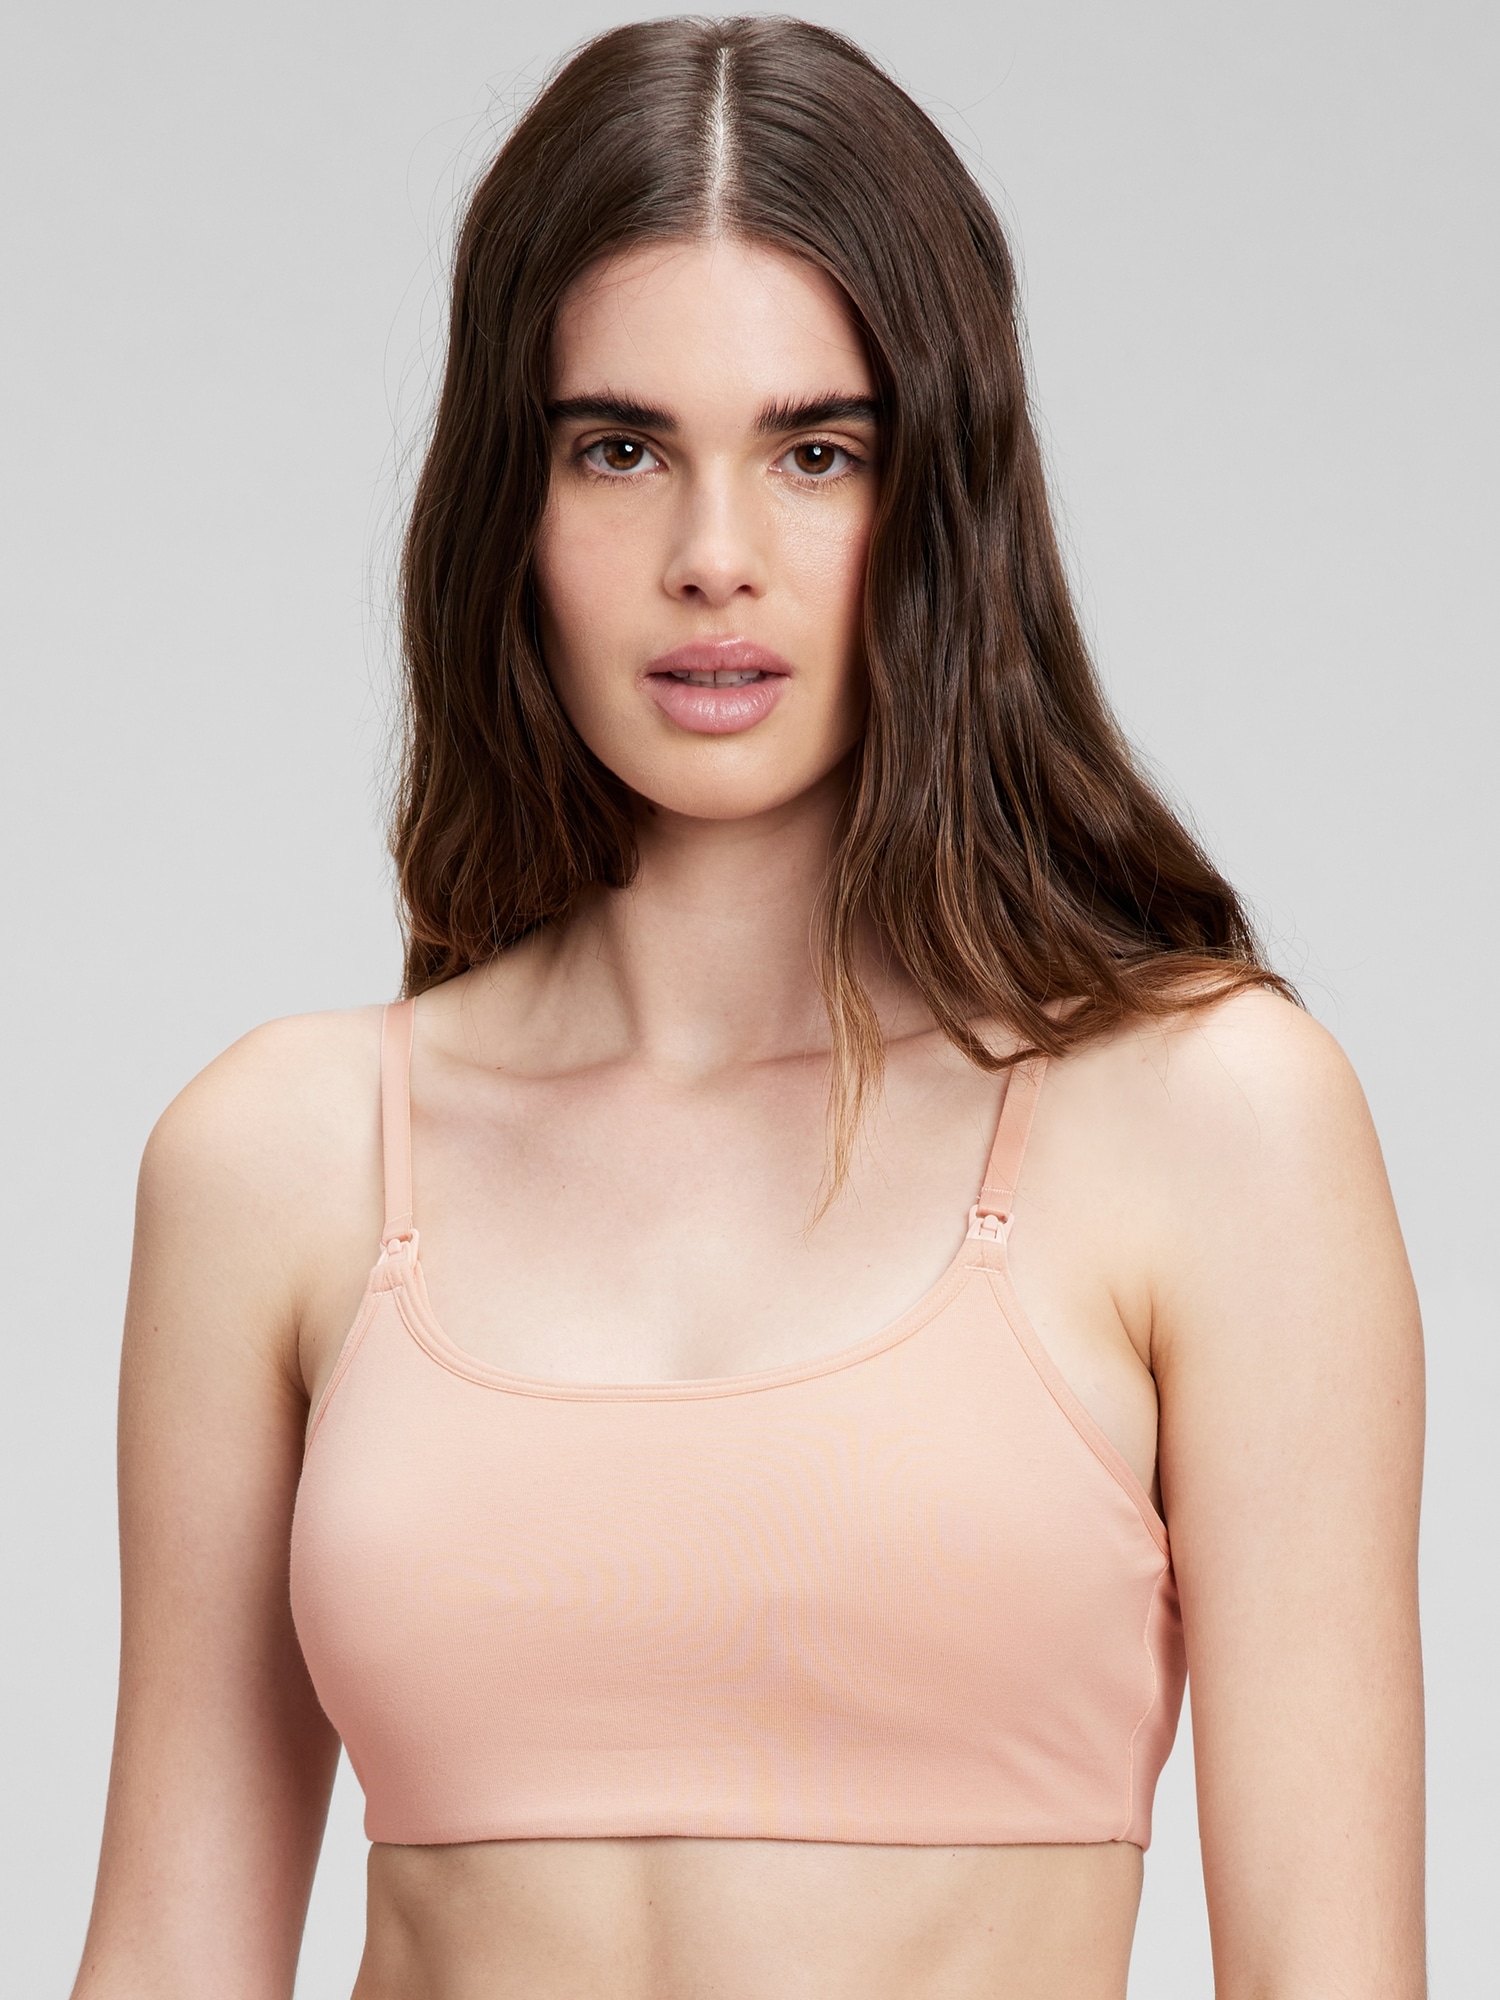 Buy Gap Gym Cami Bra Top from the Gap online shop